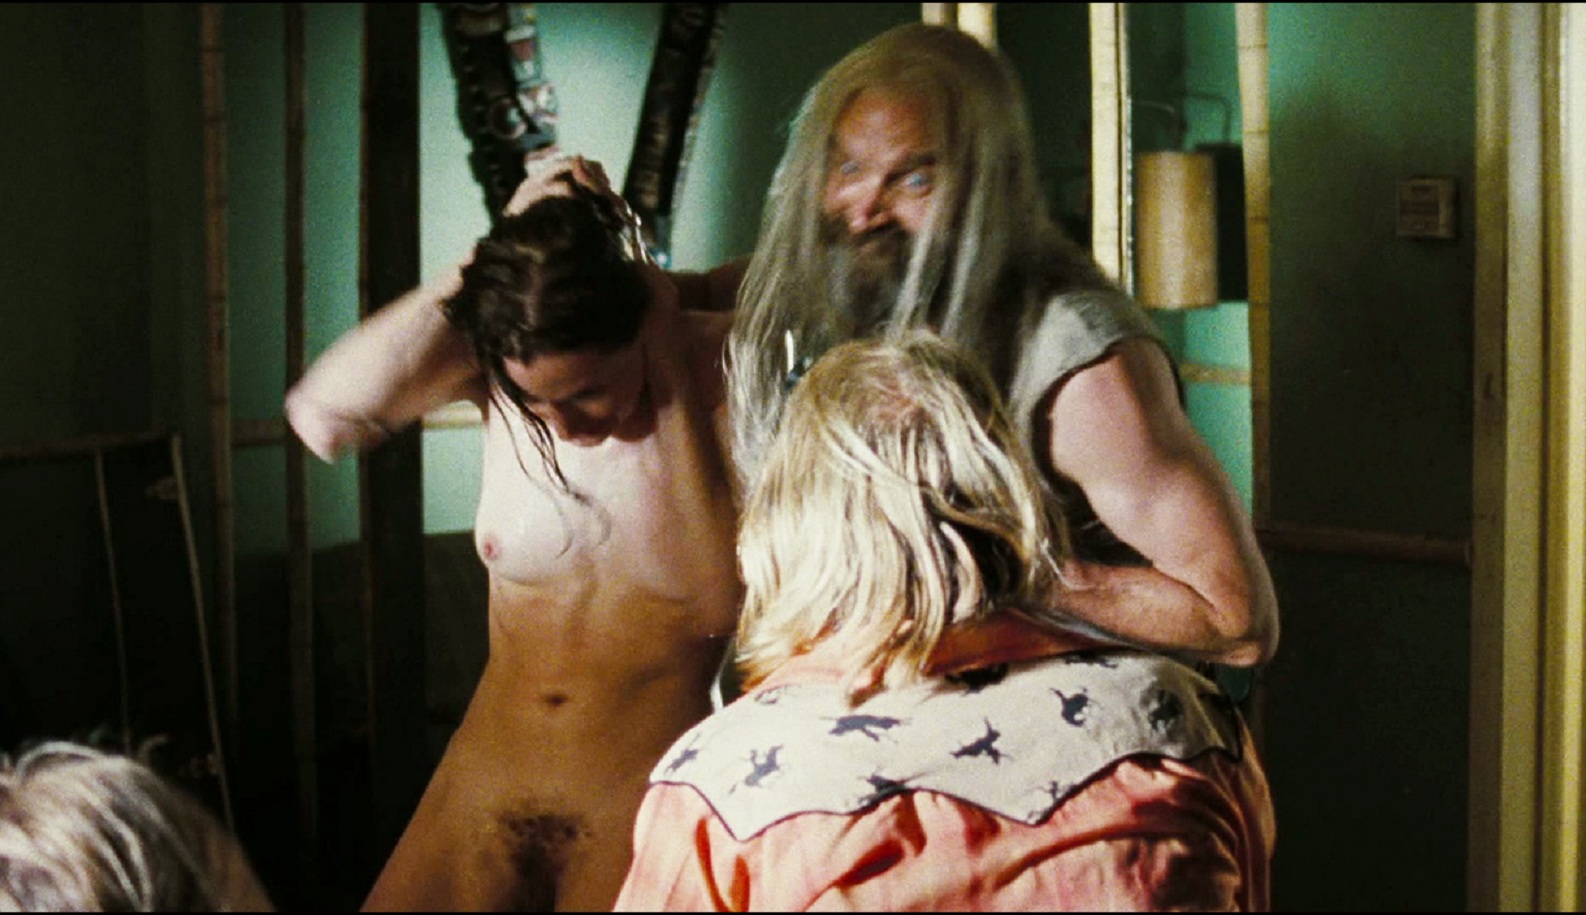 Sheri Moon Zombie Kate Norby in The Devil's Rejects 2005 - XVIDEOS.COM